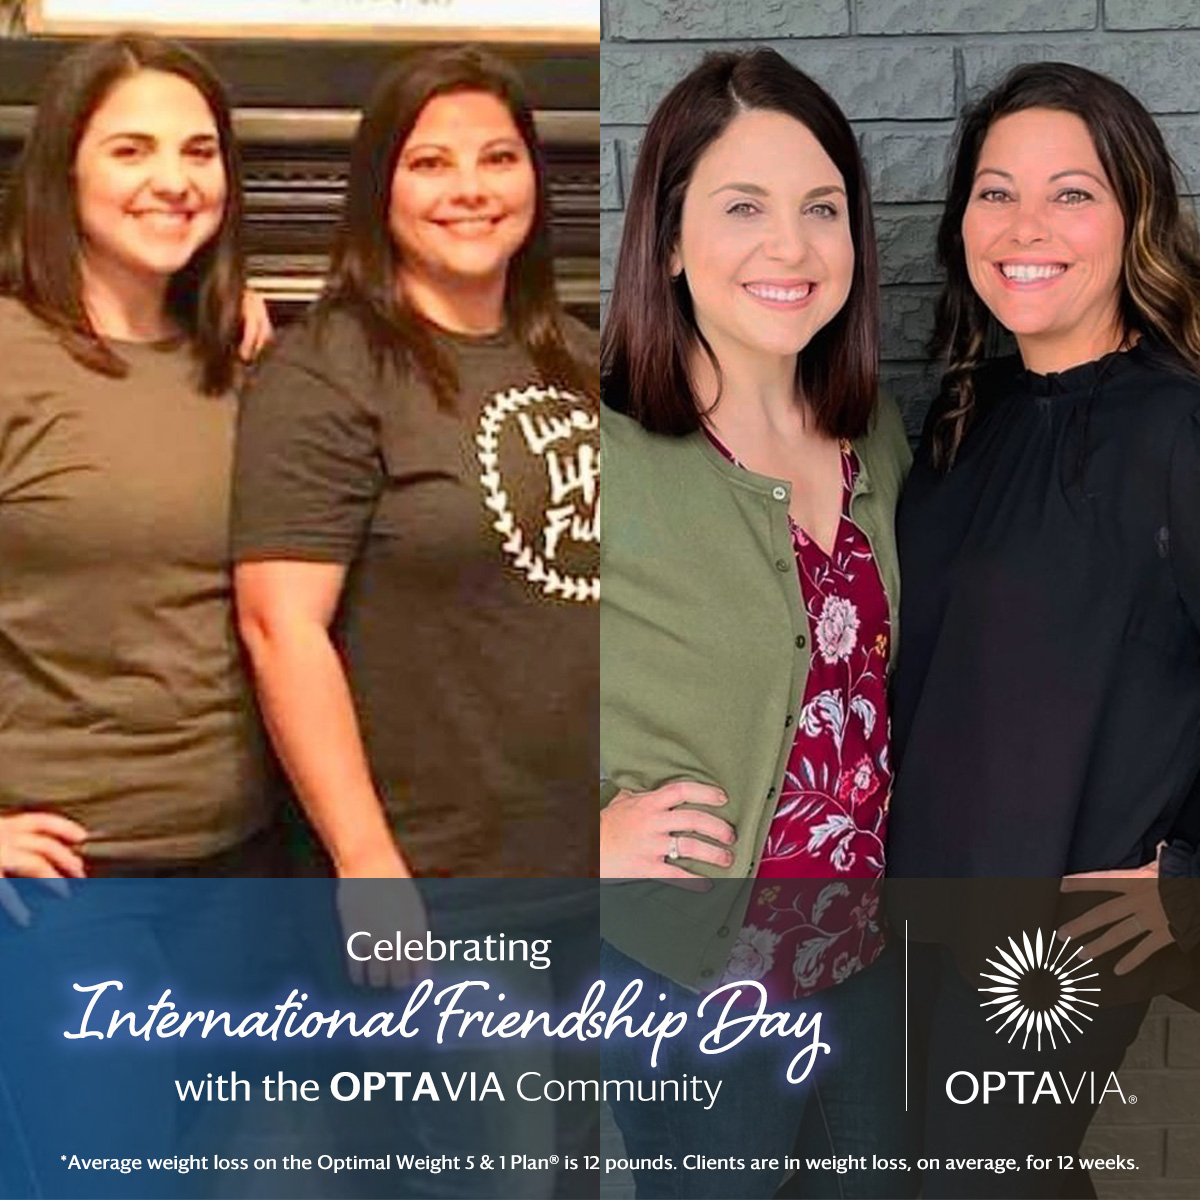 Independent OPTAVIA Coach Brittany & her friend Missie bonded even more...